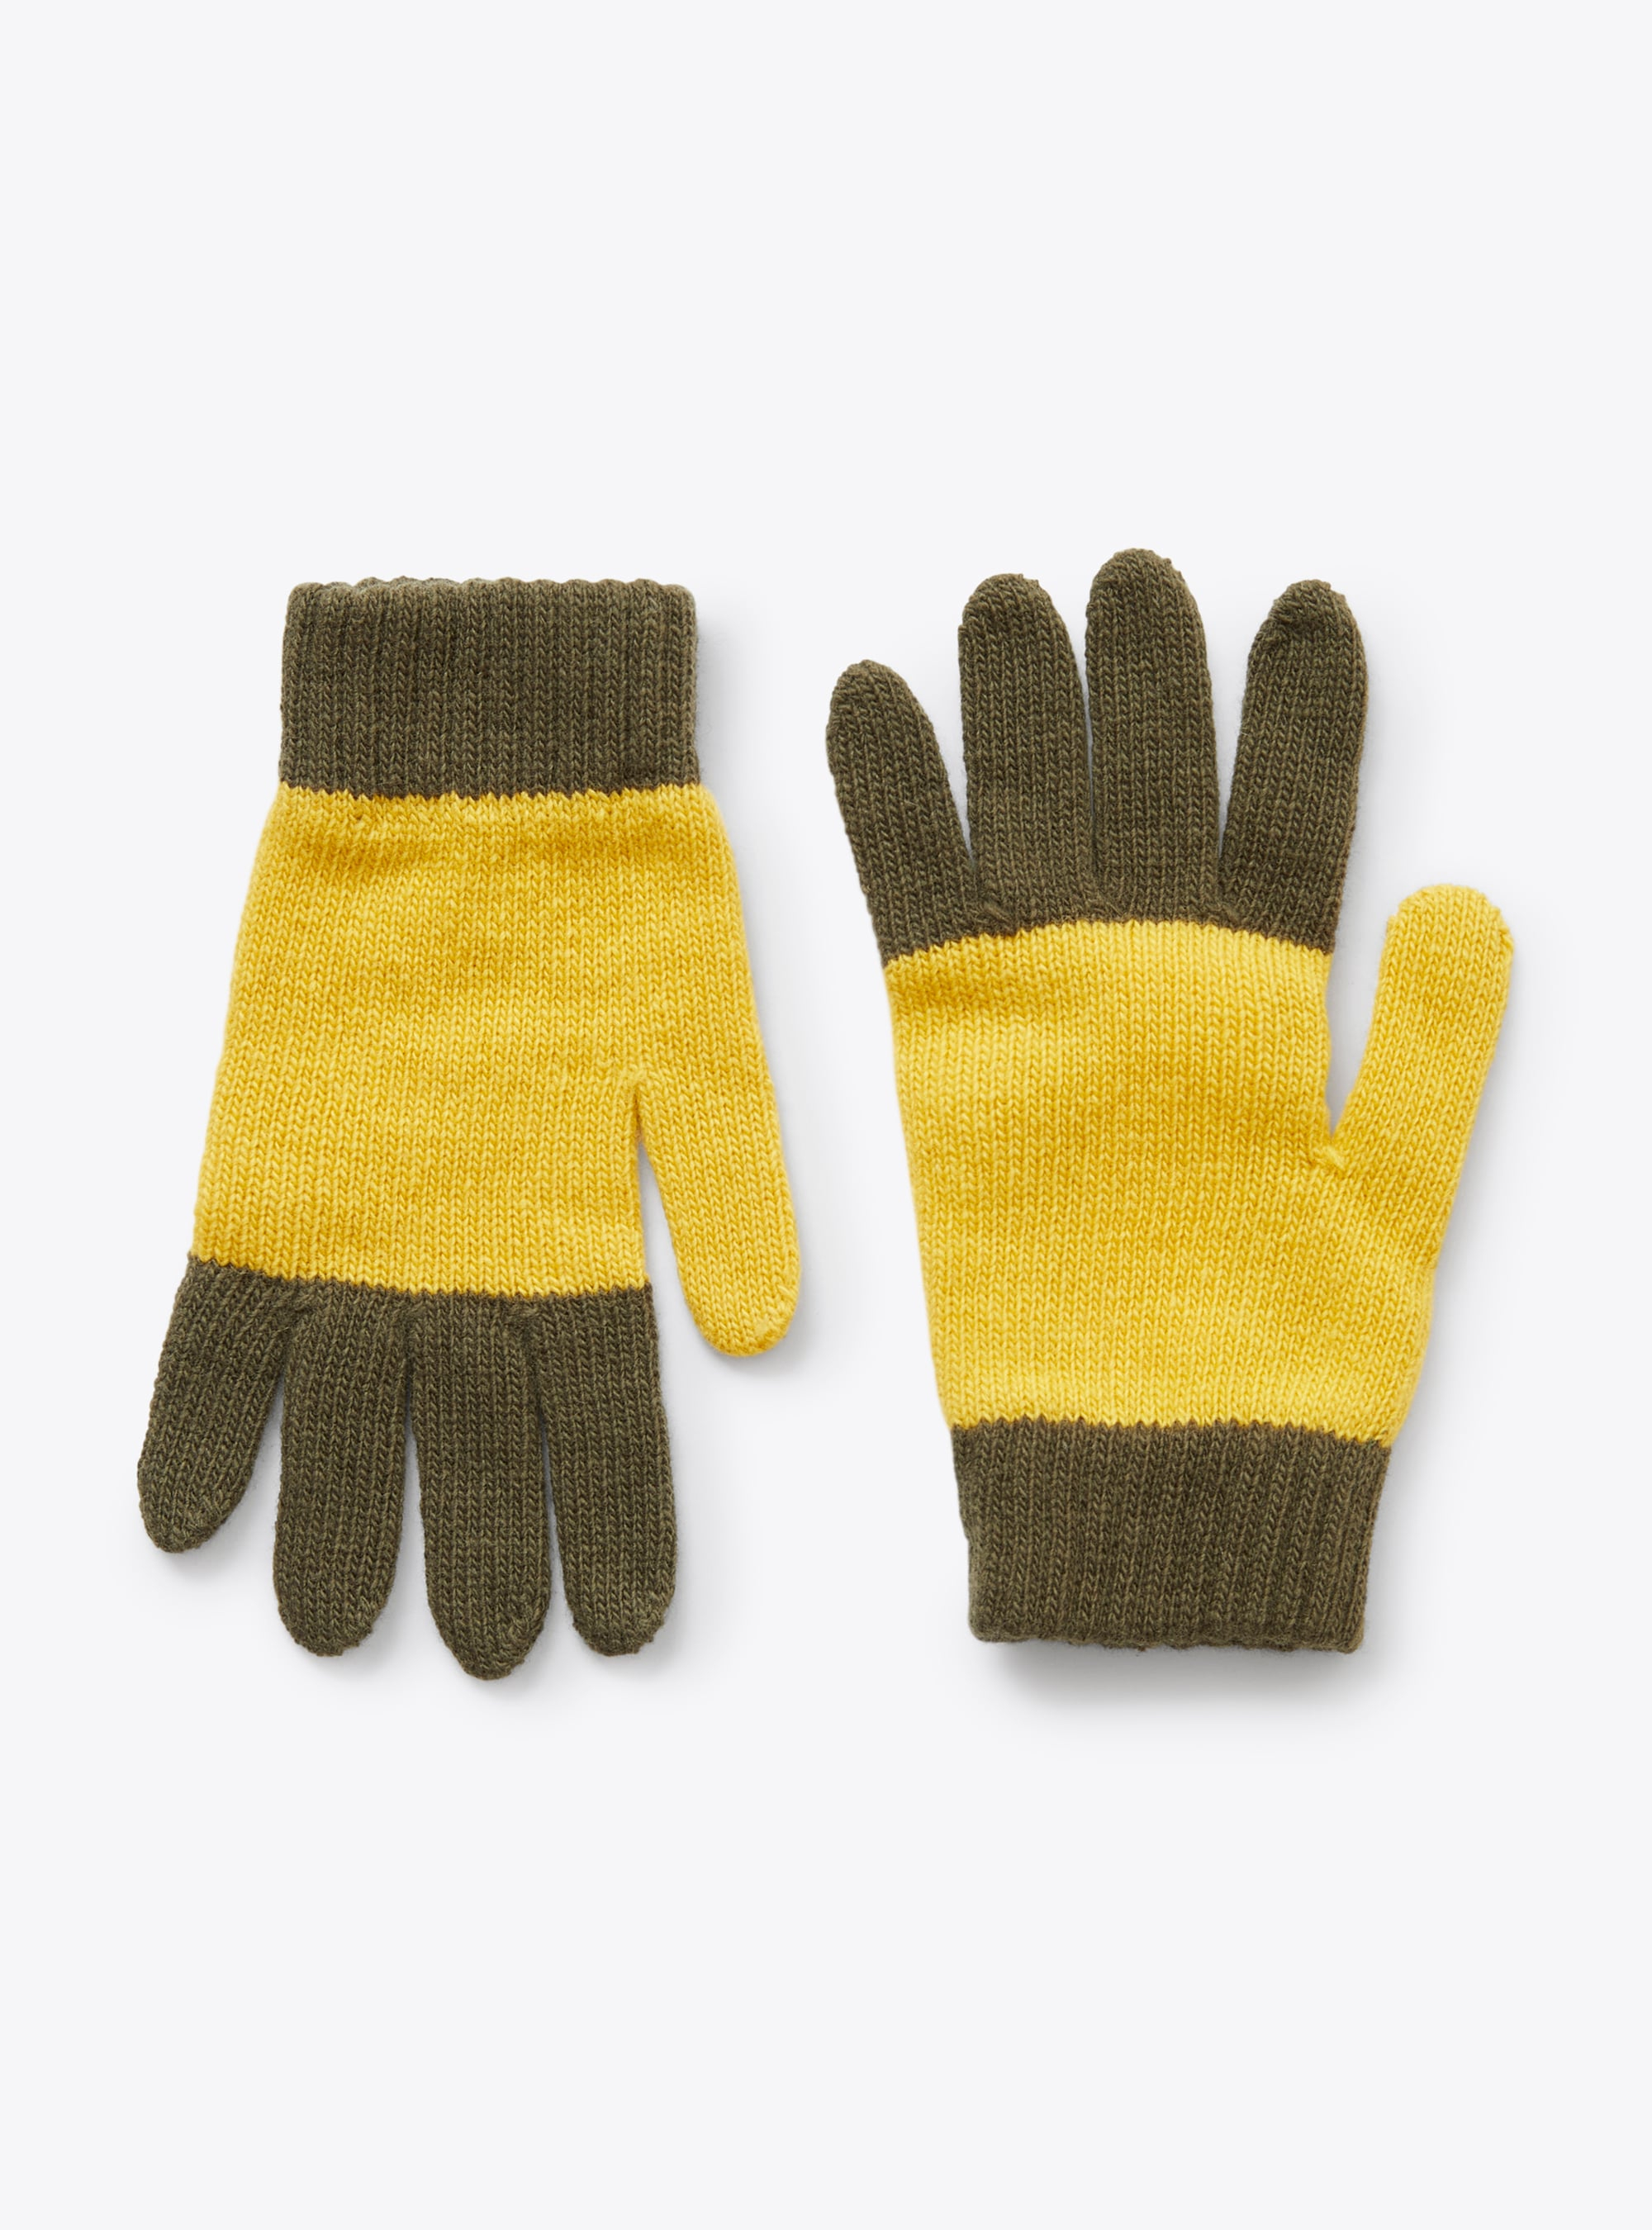 Wool gloves in a green and yellow stripe - Accessories - Il Gufo